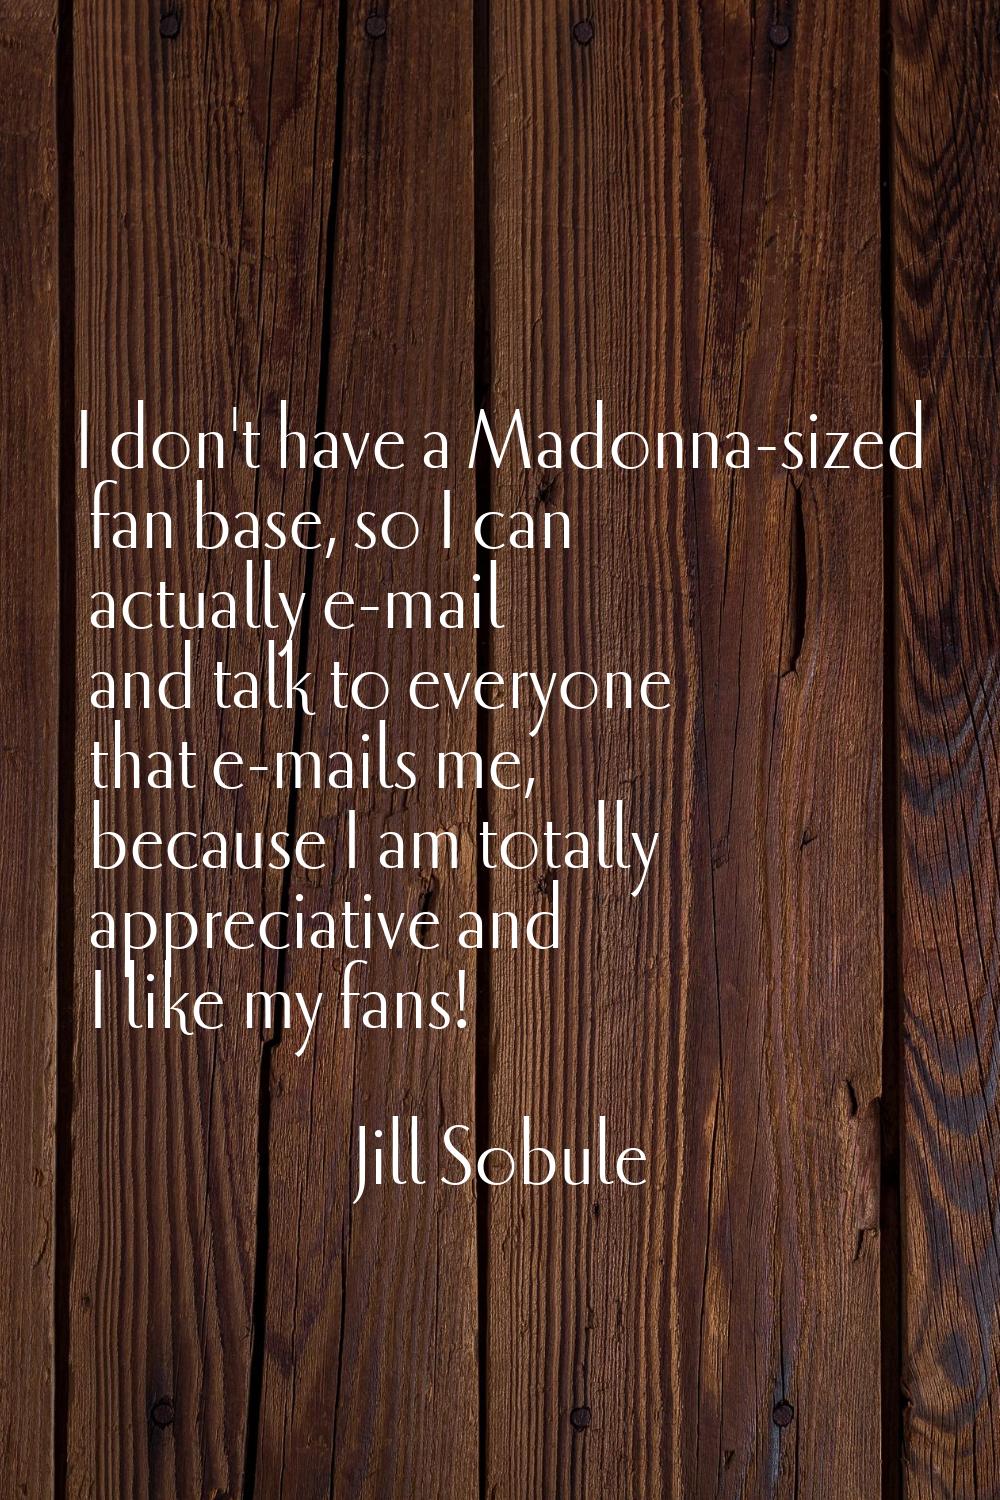 I don't have a Madonna-sized fan base, so I can actually e-mail and talk to everyone that e-mails m